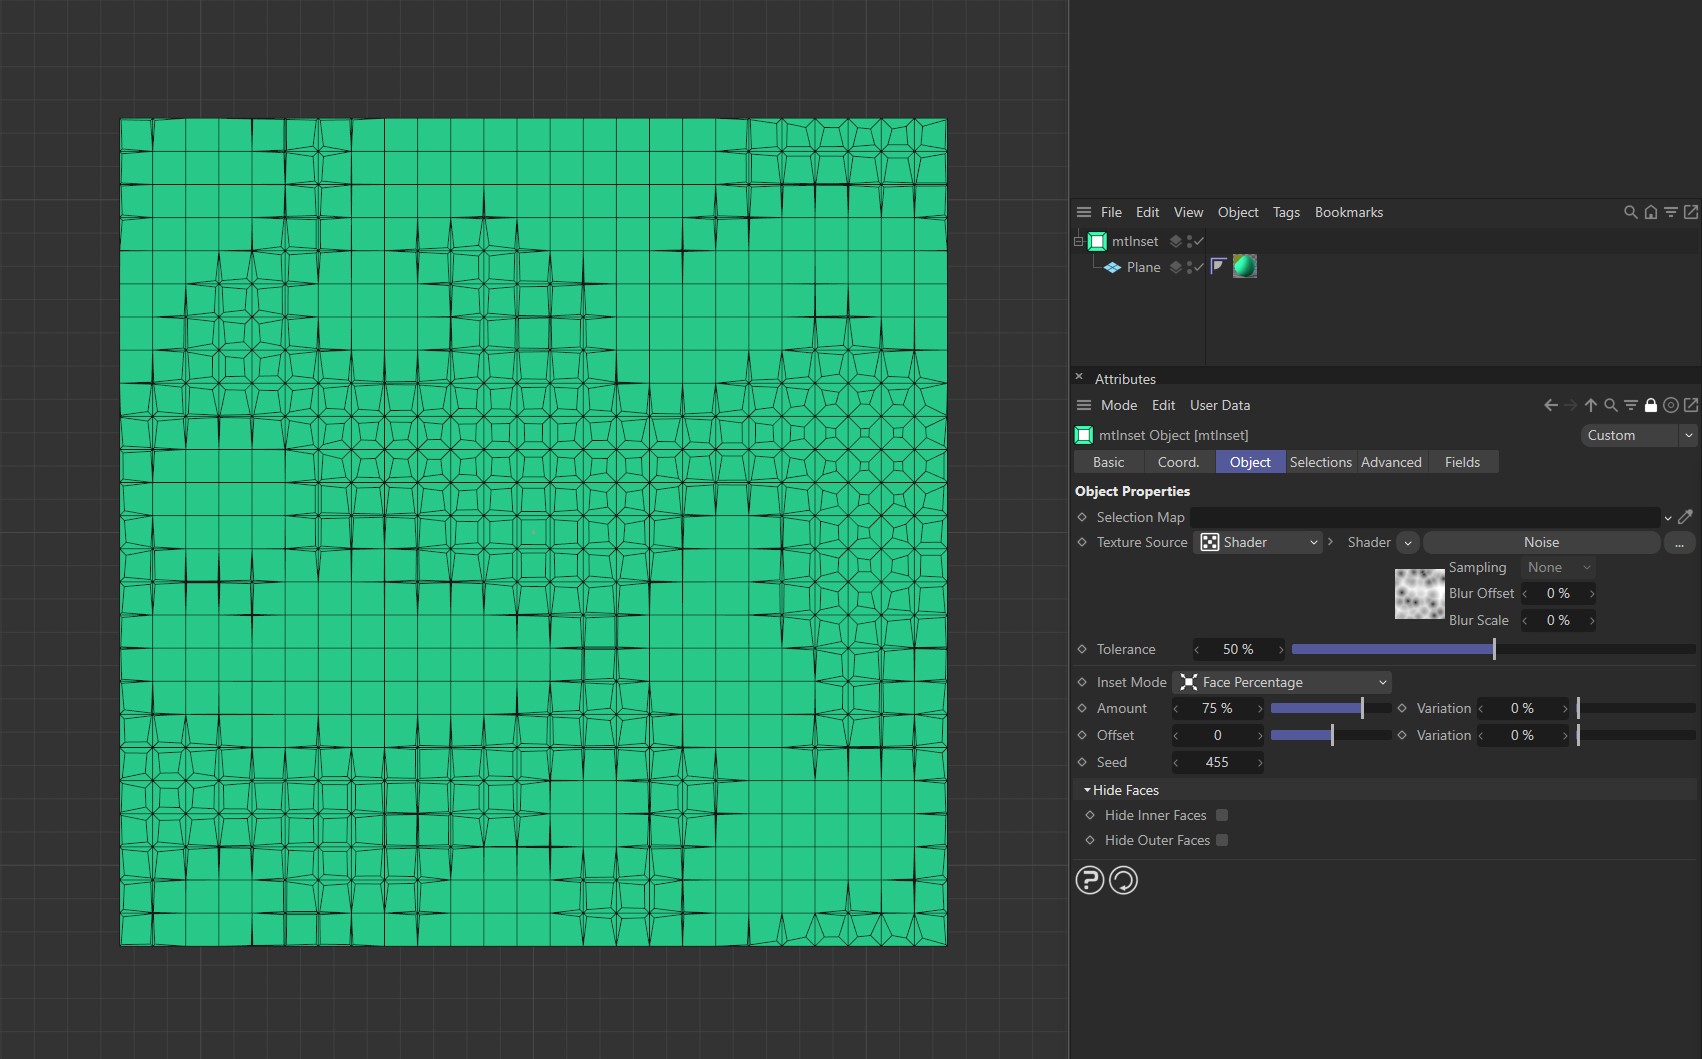 Texture Source set as Shader, with inset generation being driven by the Noise shader.